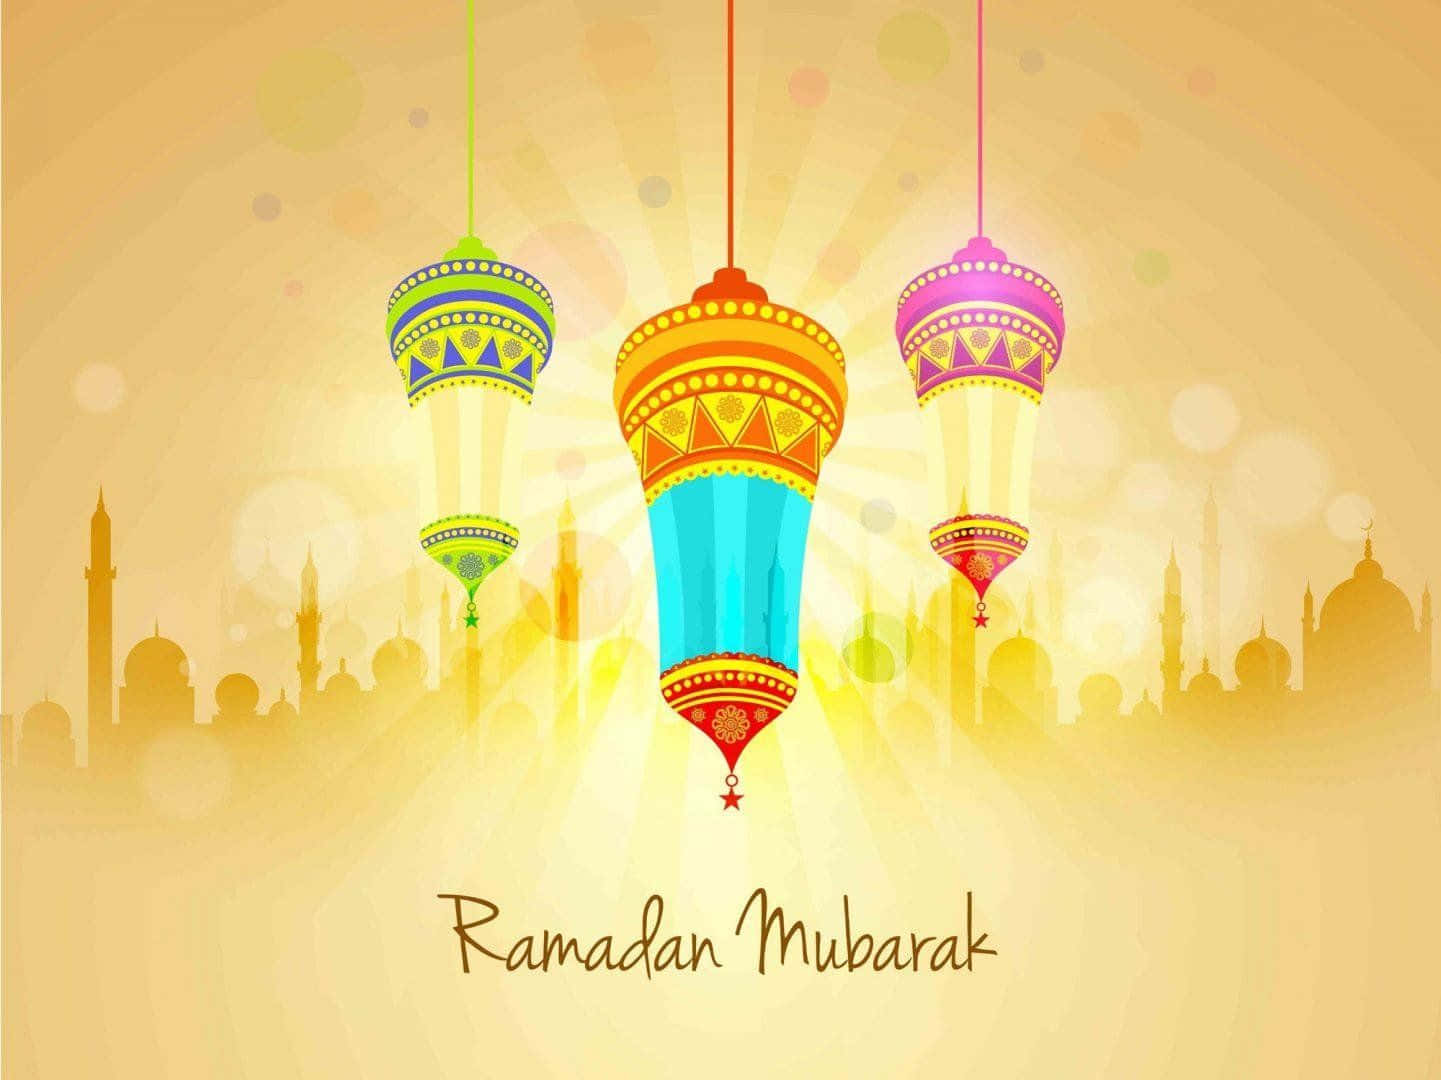 Feel the spirit of Ramadan with this peaceful background